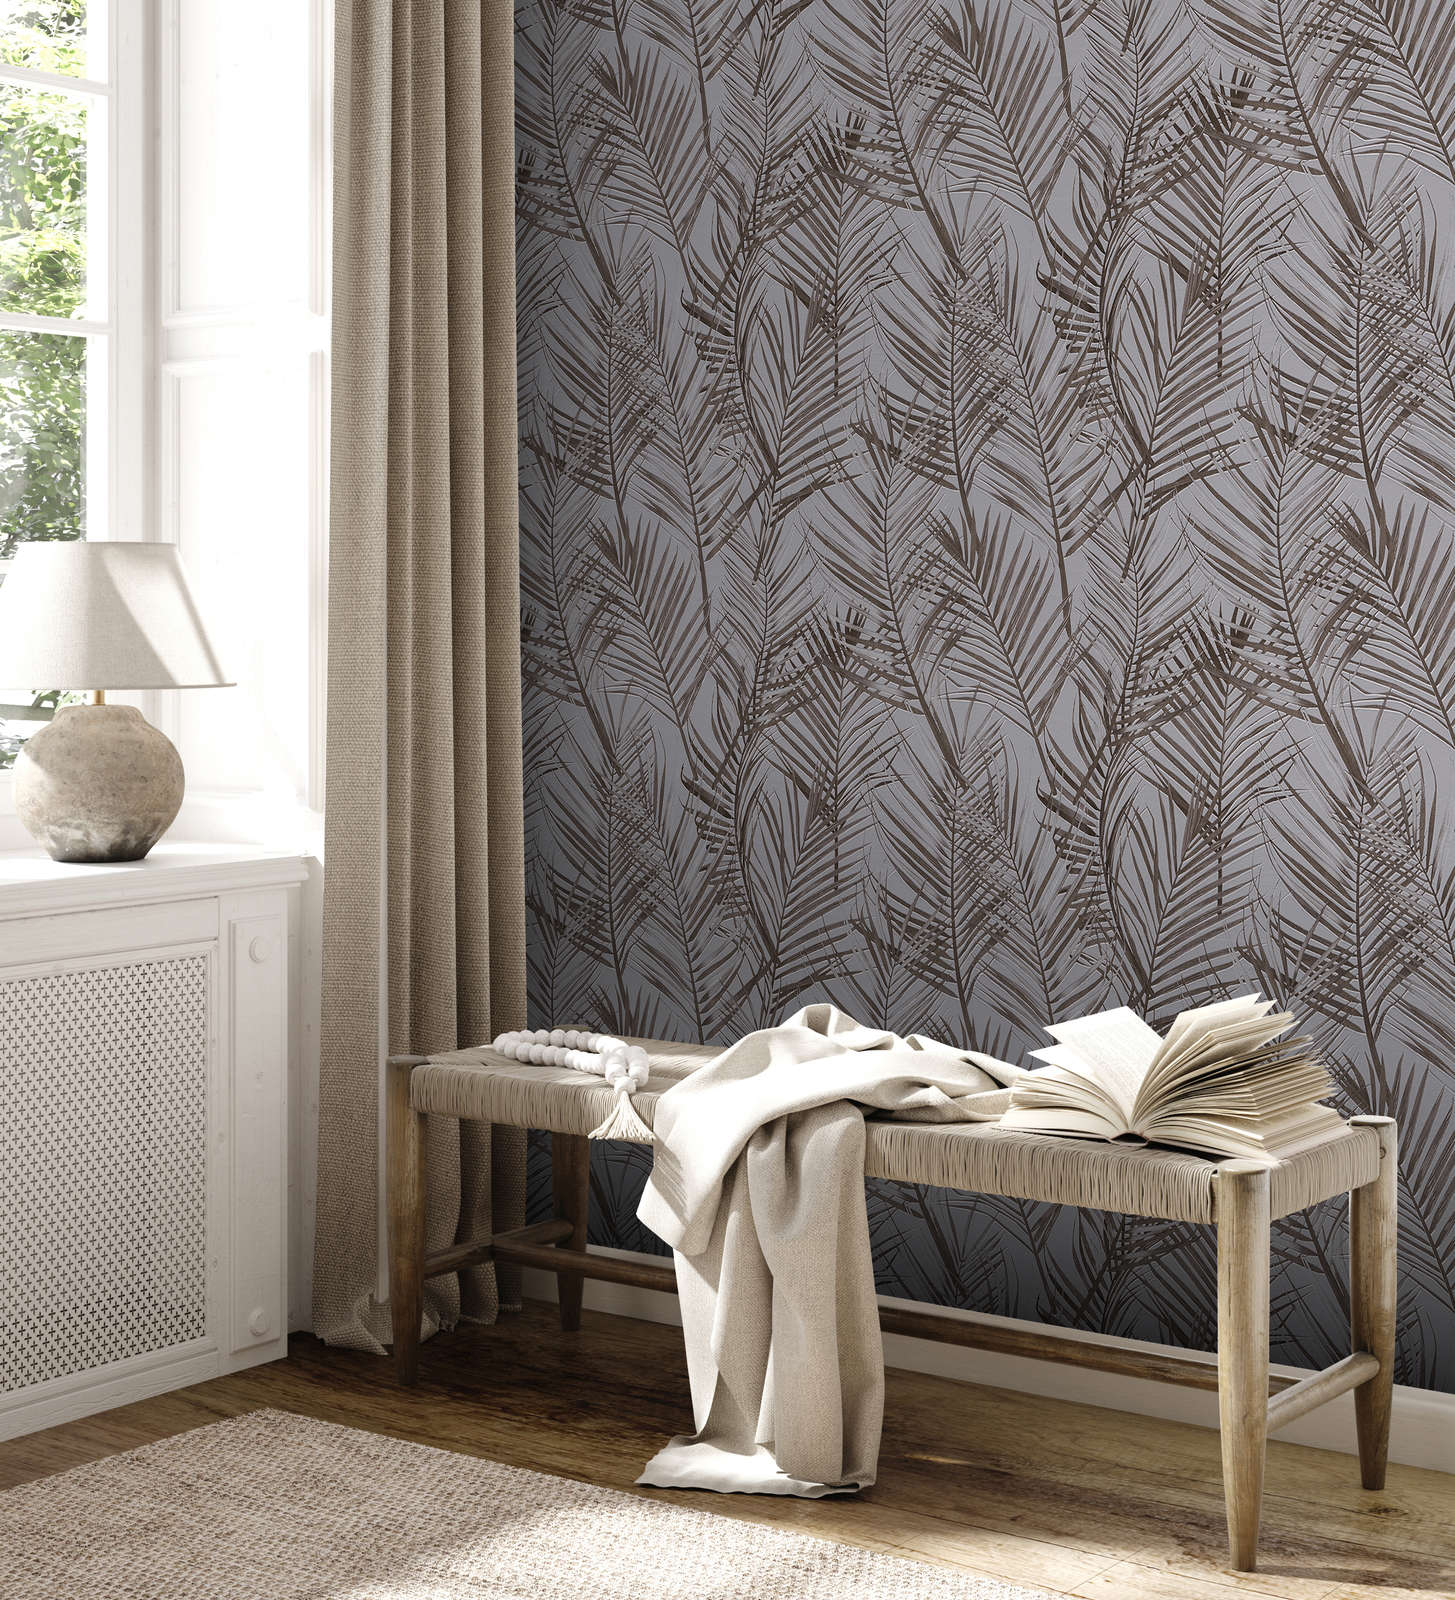             Floral wallpaper with palm pattern in matt - grey, brown
        